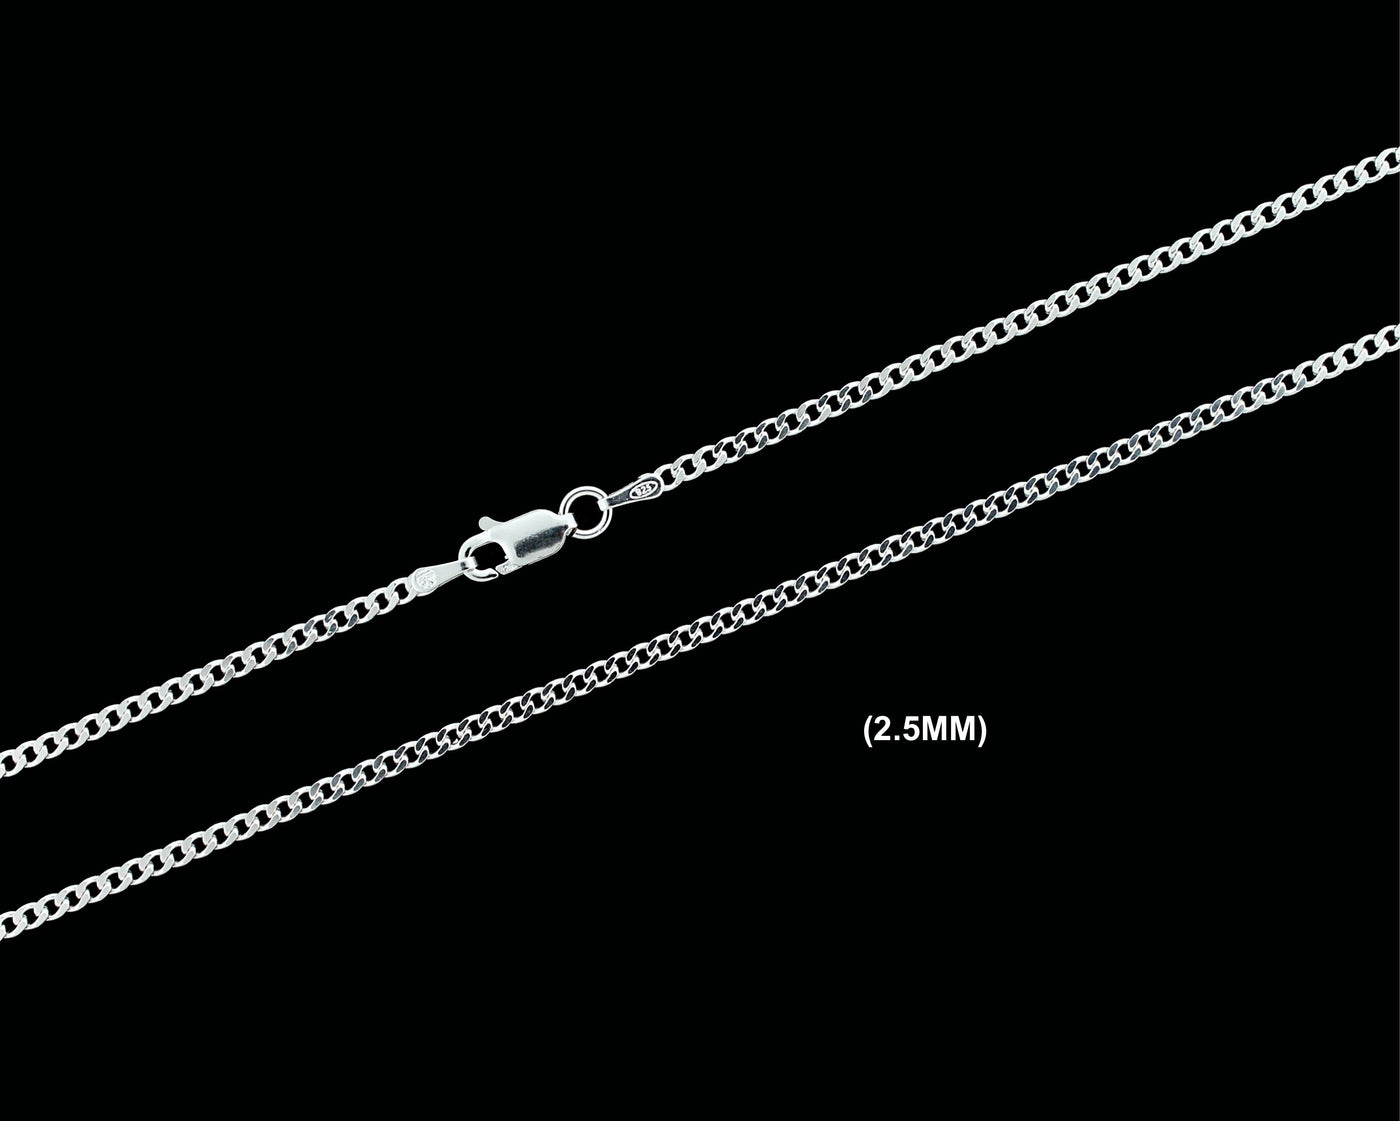 2.5MM Real Solid 925 Sterling Silver Curb Cuban Link Chain Pendant Necklace UNISEX